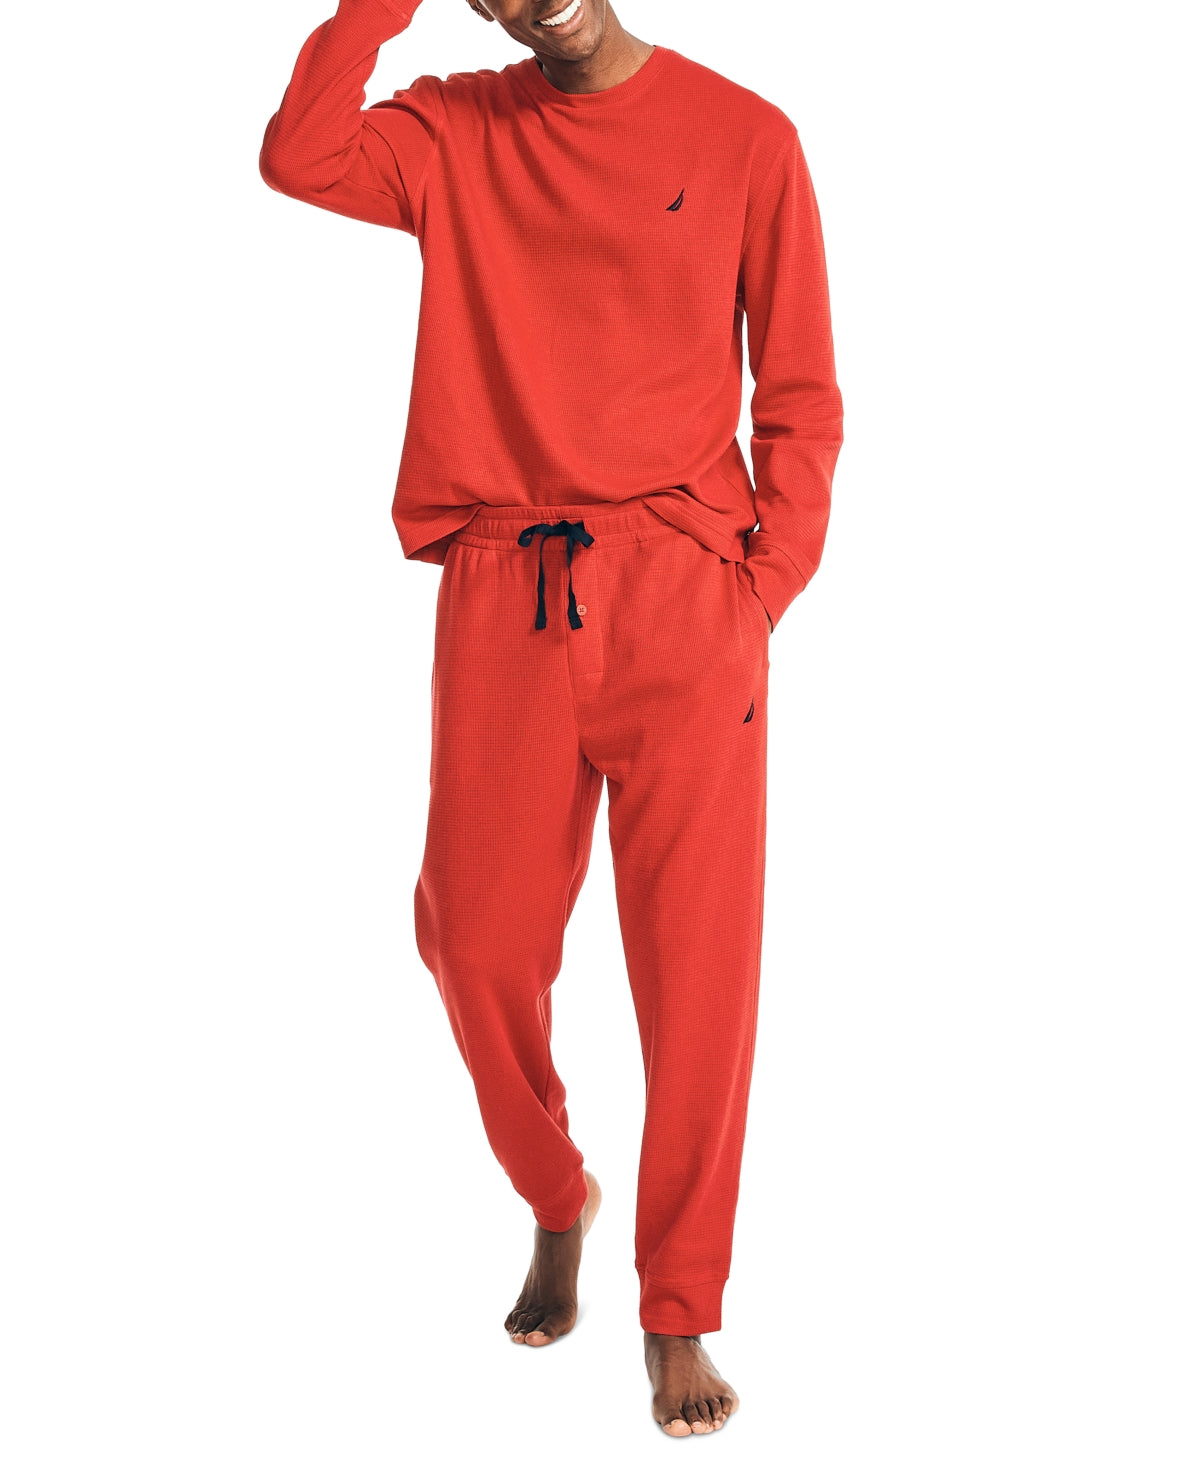 Nautica Men's Waffle Knit Thermal Pajama Set Red Size X-Large – Steals